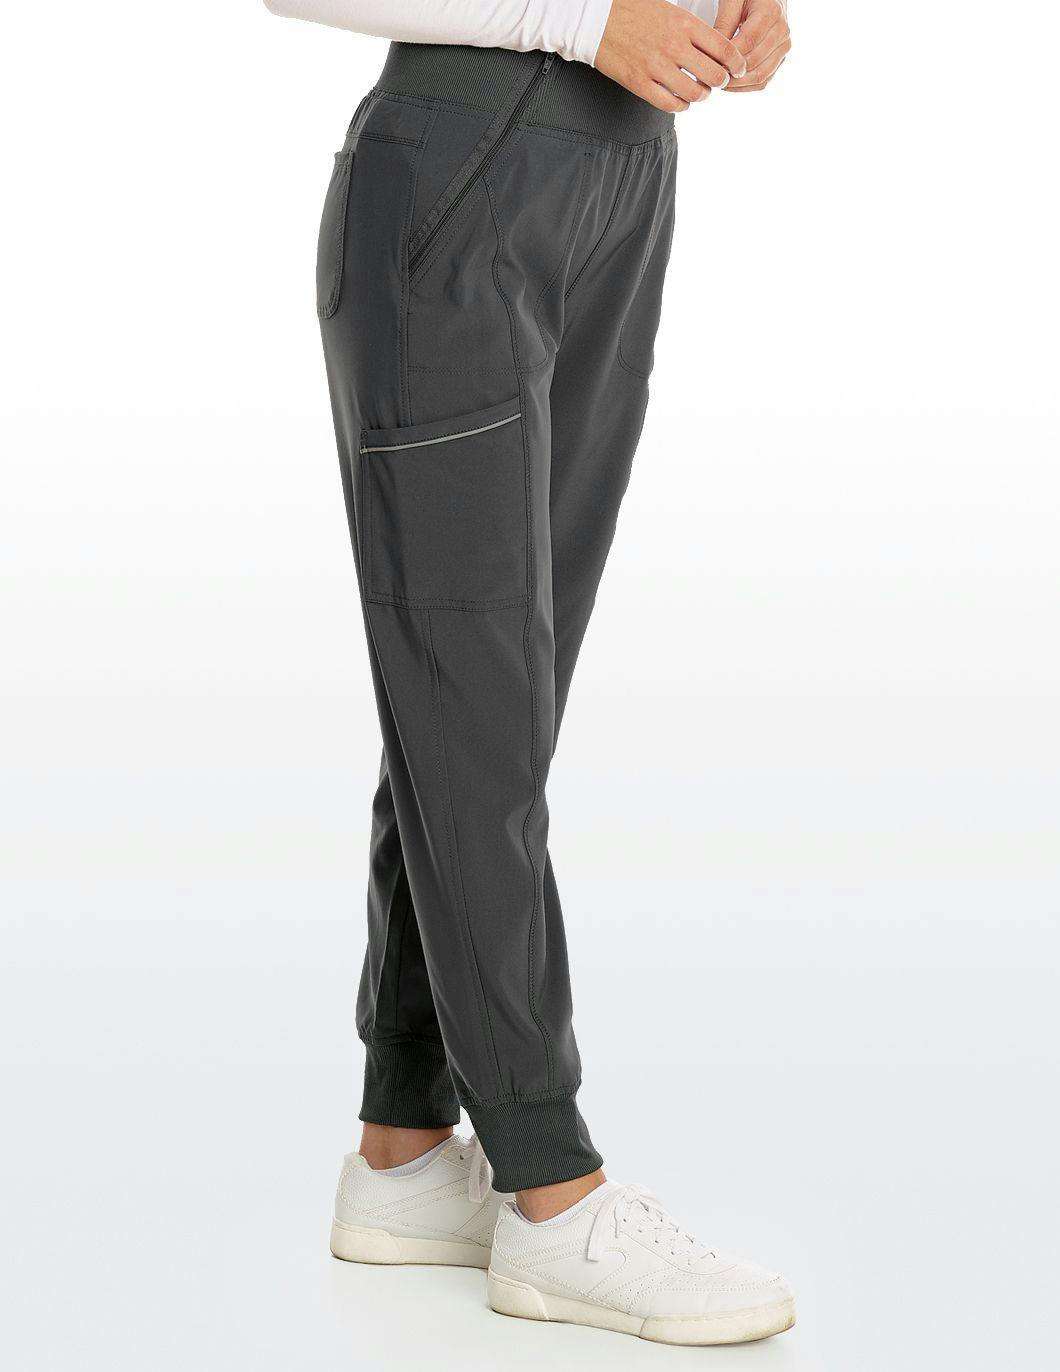 cherokee-infinity-womens-jogger-pant-pewter-side